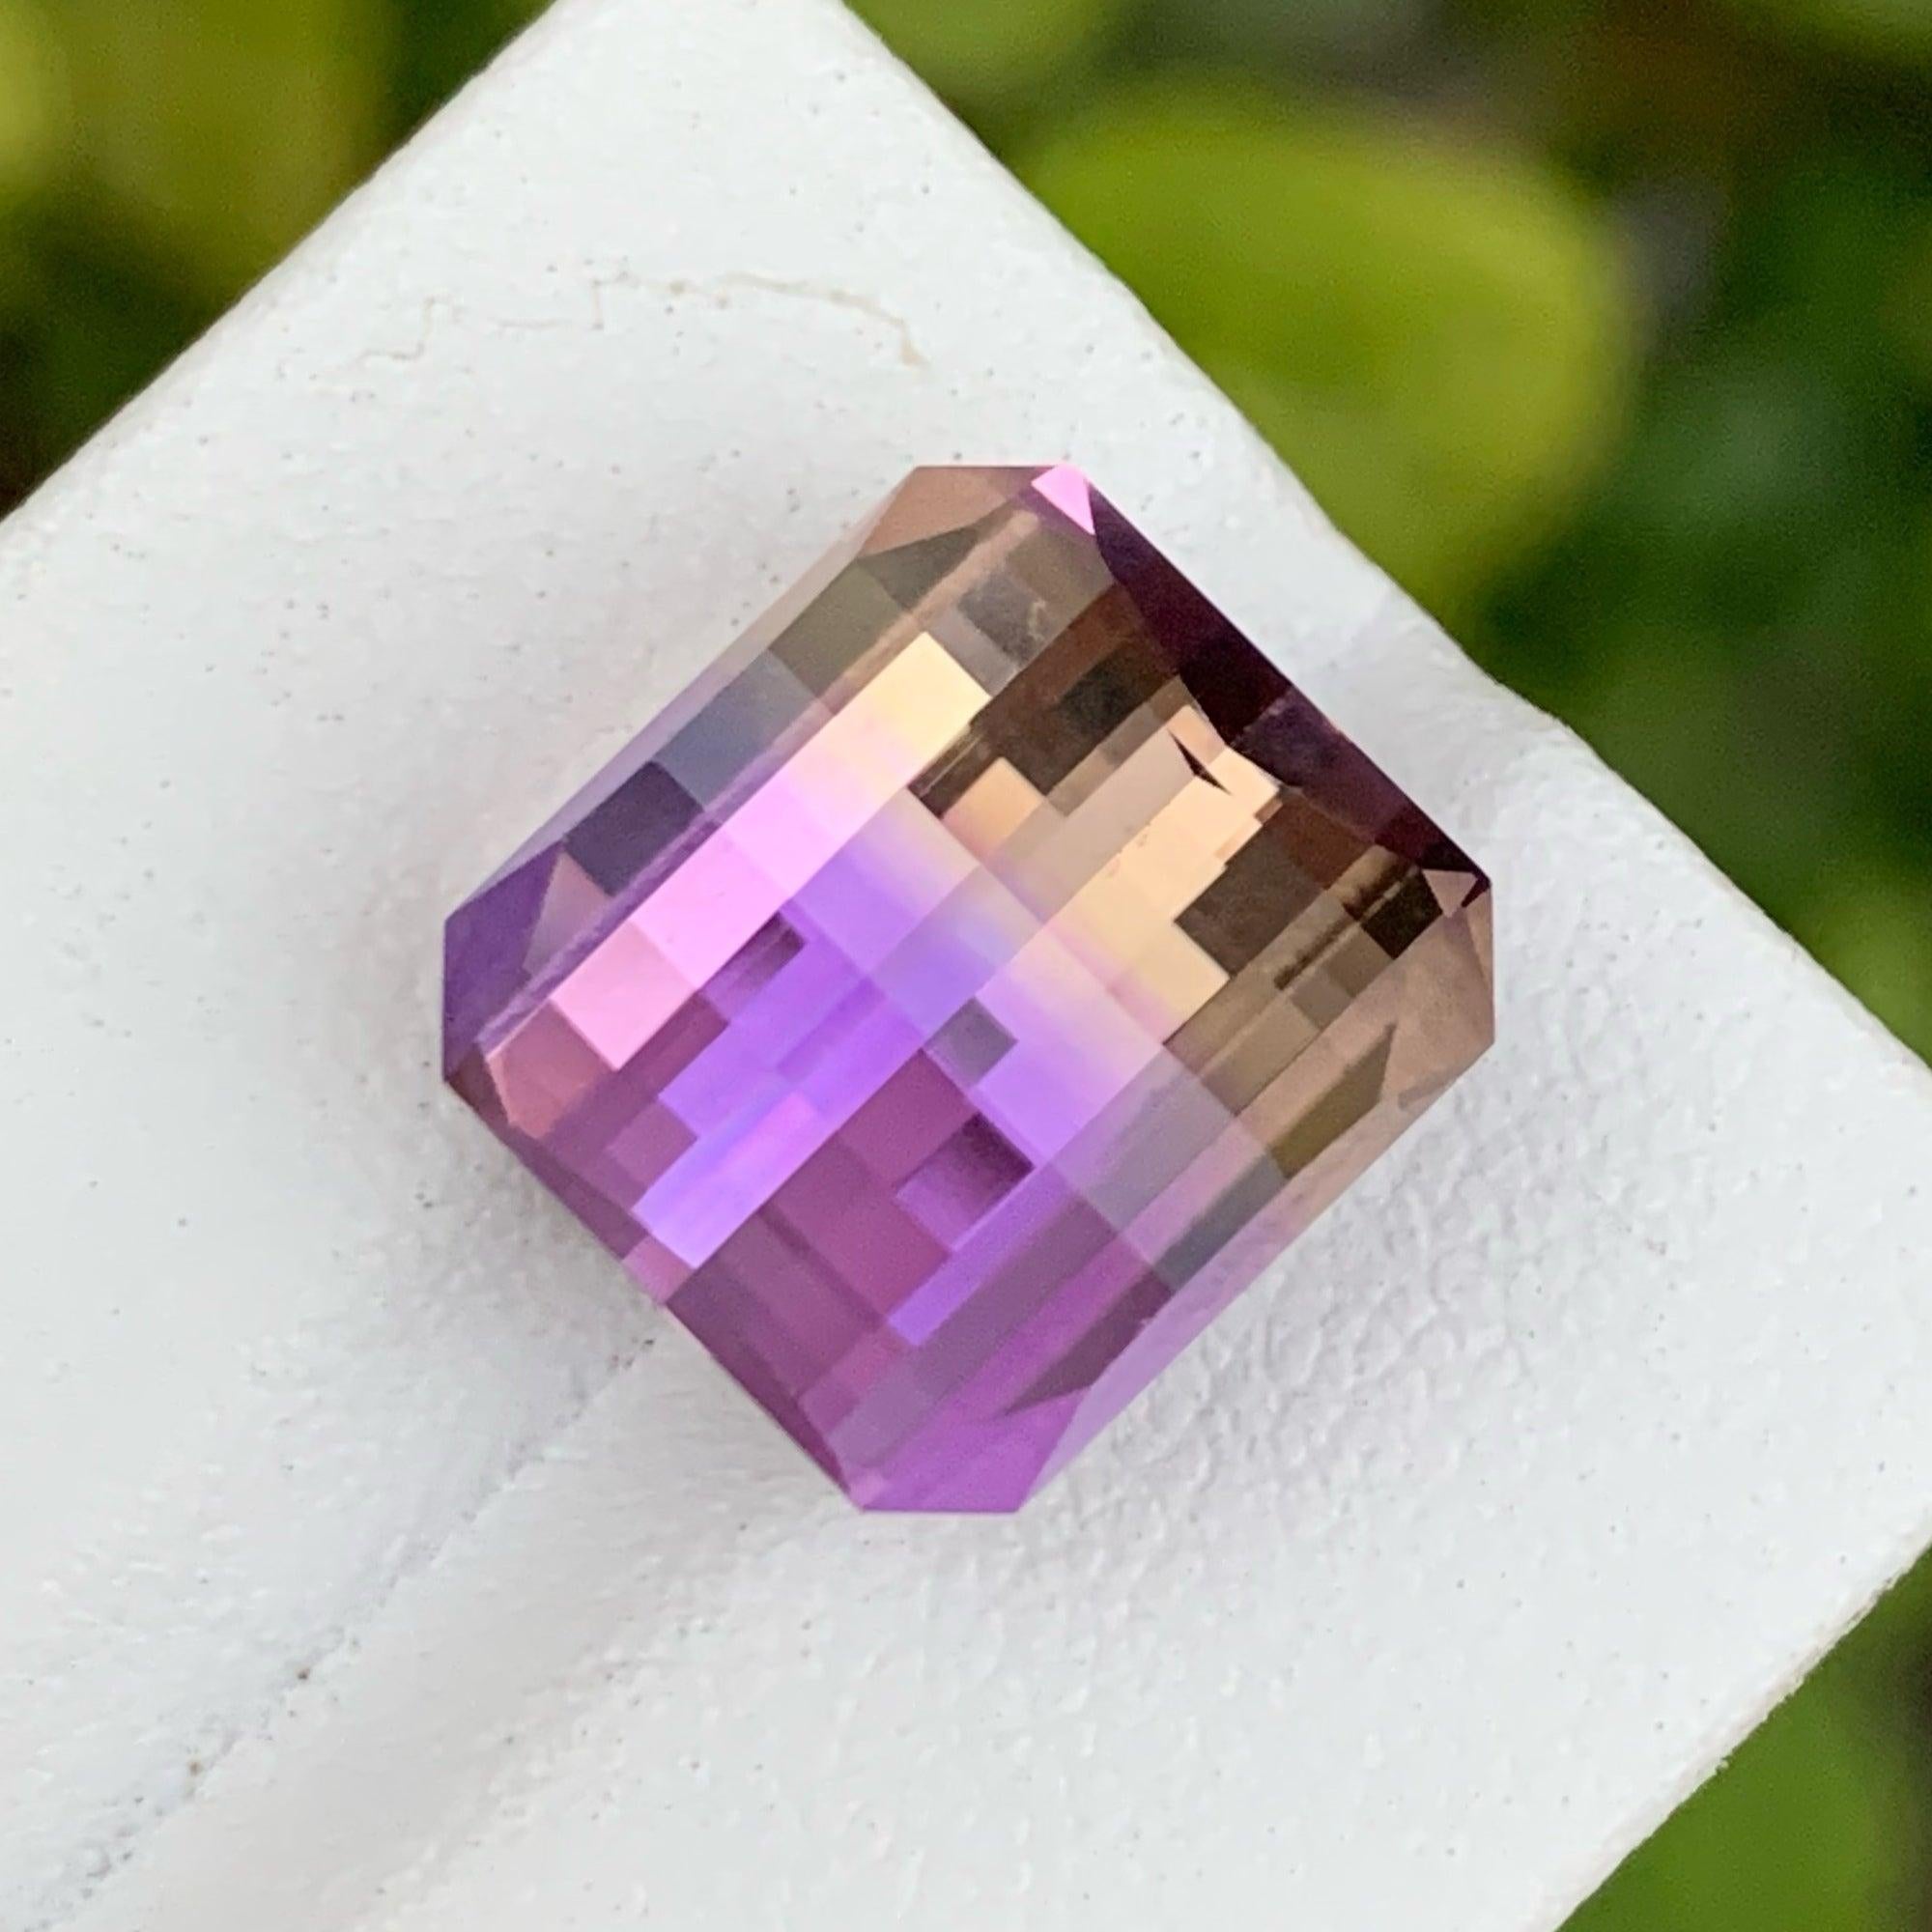 Pretty Oppose Bar Cut Ametrine Stone of 11.45 carats from Bolivia has a wonderful cut in a Octagon shape, incredible Purplish Yellow color. Great brilliance. This gem is Loupe Clean Clarity. 

Product Information:
GEMSTONE TYPE:	Pretty Oppose Bar